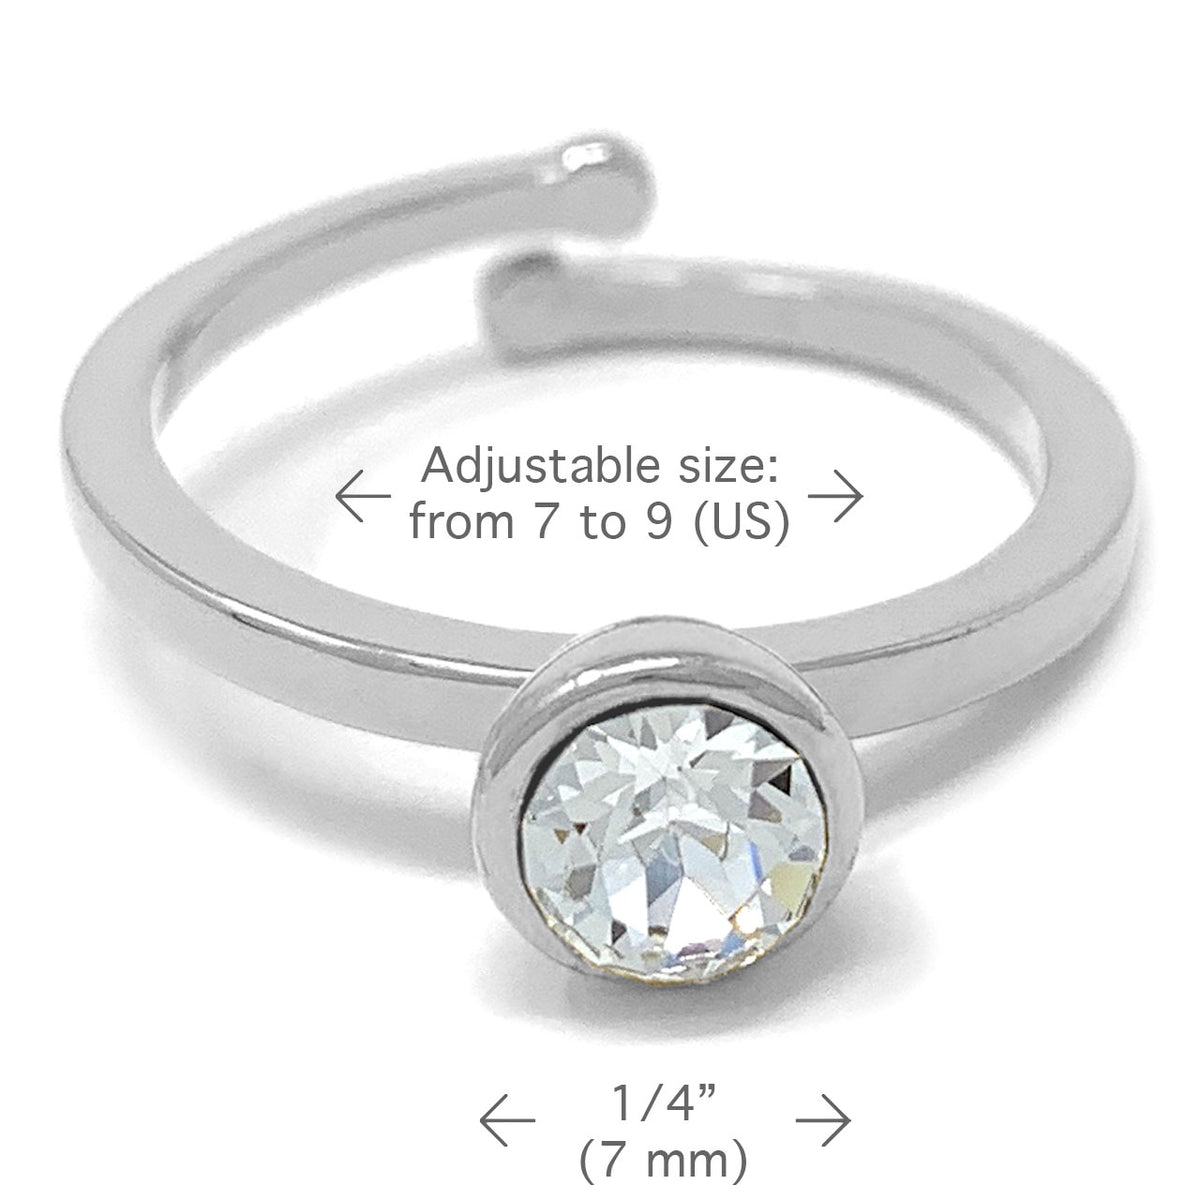 Harley Adjustable Ring with White Clear Round Crystals from Swarovski Silver Toned Rhodium Plated - Ed Heart